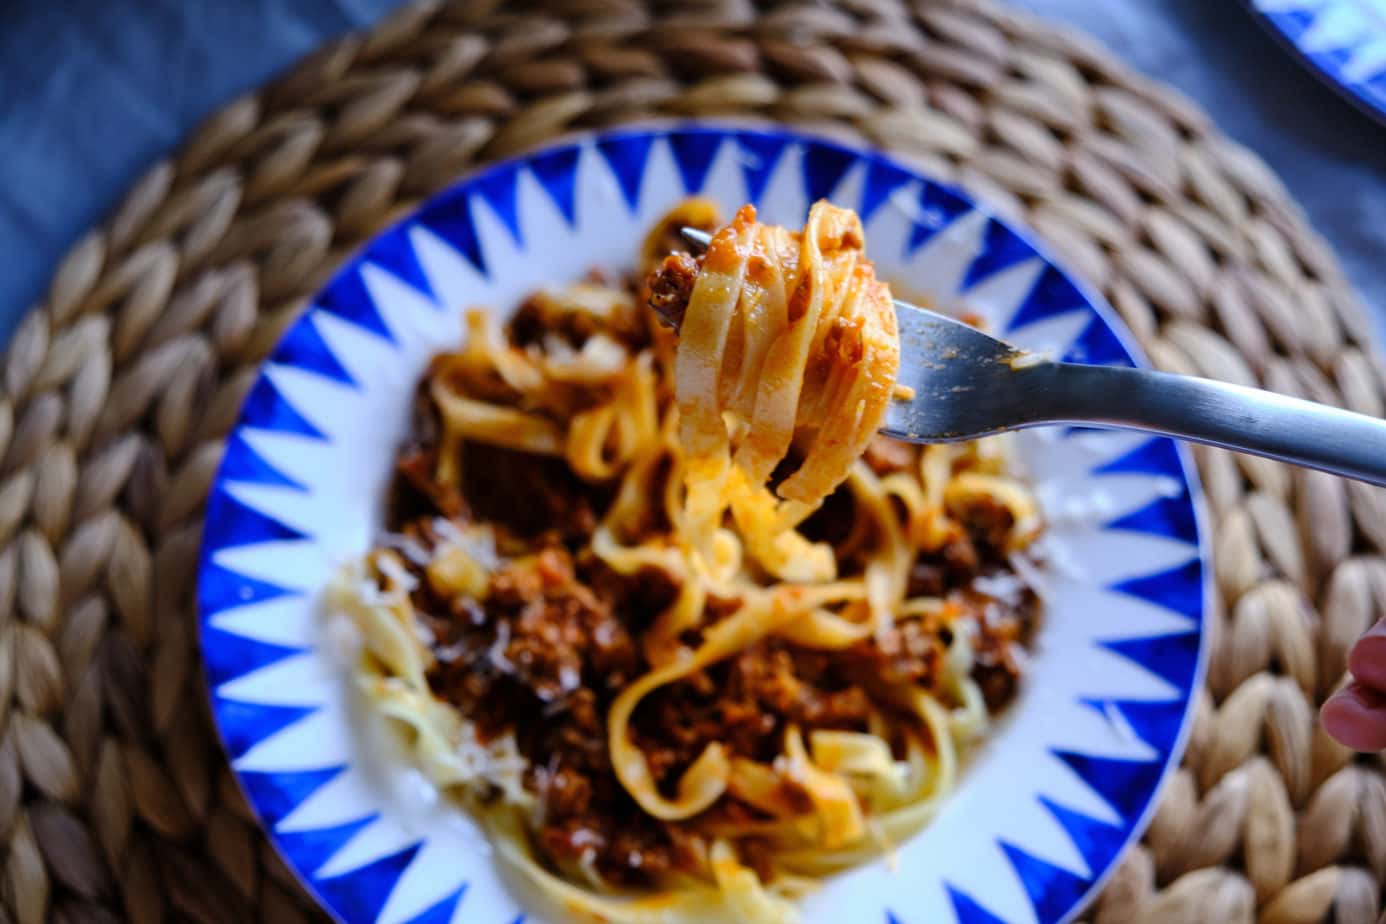 flat lay of a blue and white bowl on a circular seagrass placemat. The bowl is full of flat tagliatelle pasta and ground beef in a red ragu sauce. A fork is lifting some of the pasta up from the bowl towards the camera. Bologna Italy Food Guide.